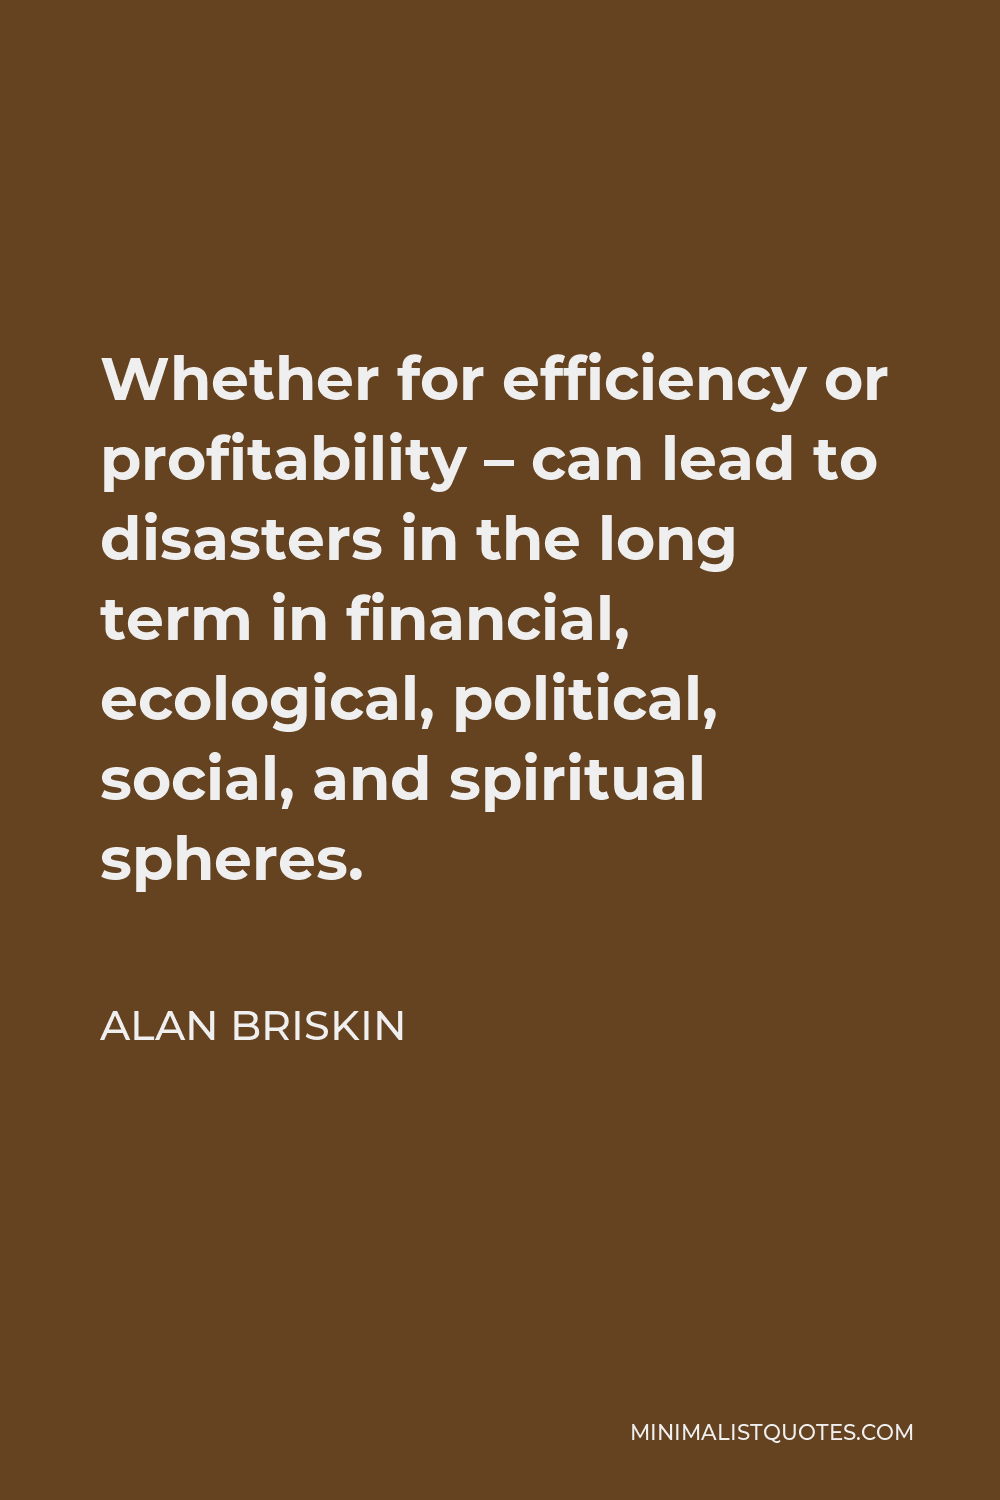 Alan Briskin Quote - Whether for efficiency or profitability – can lead to disasters in the long term in financial, ecological, political, social, and spiritual spheres.